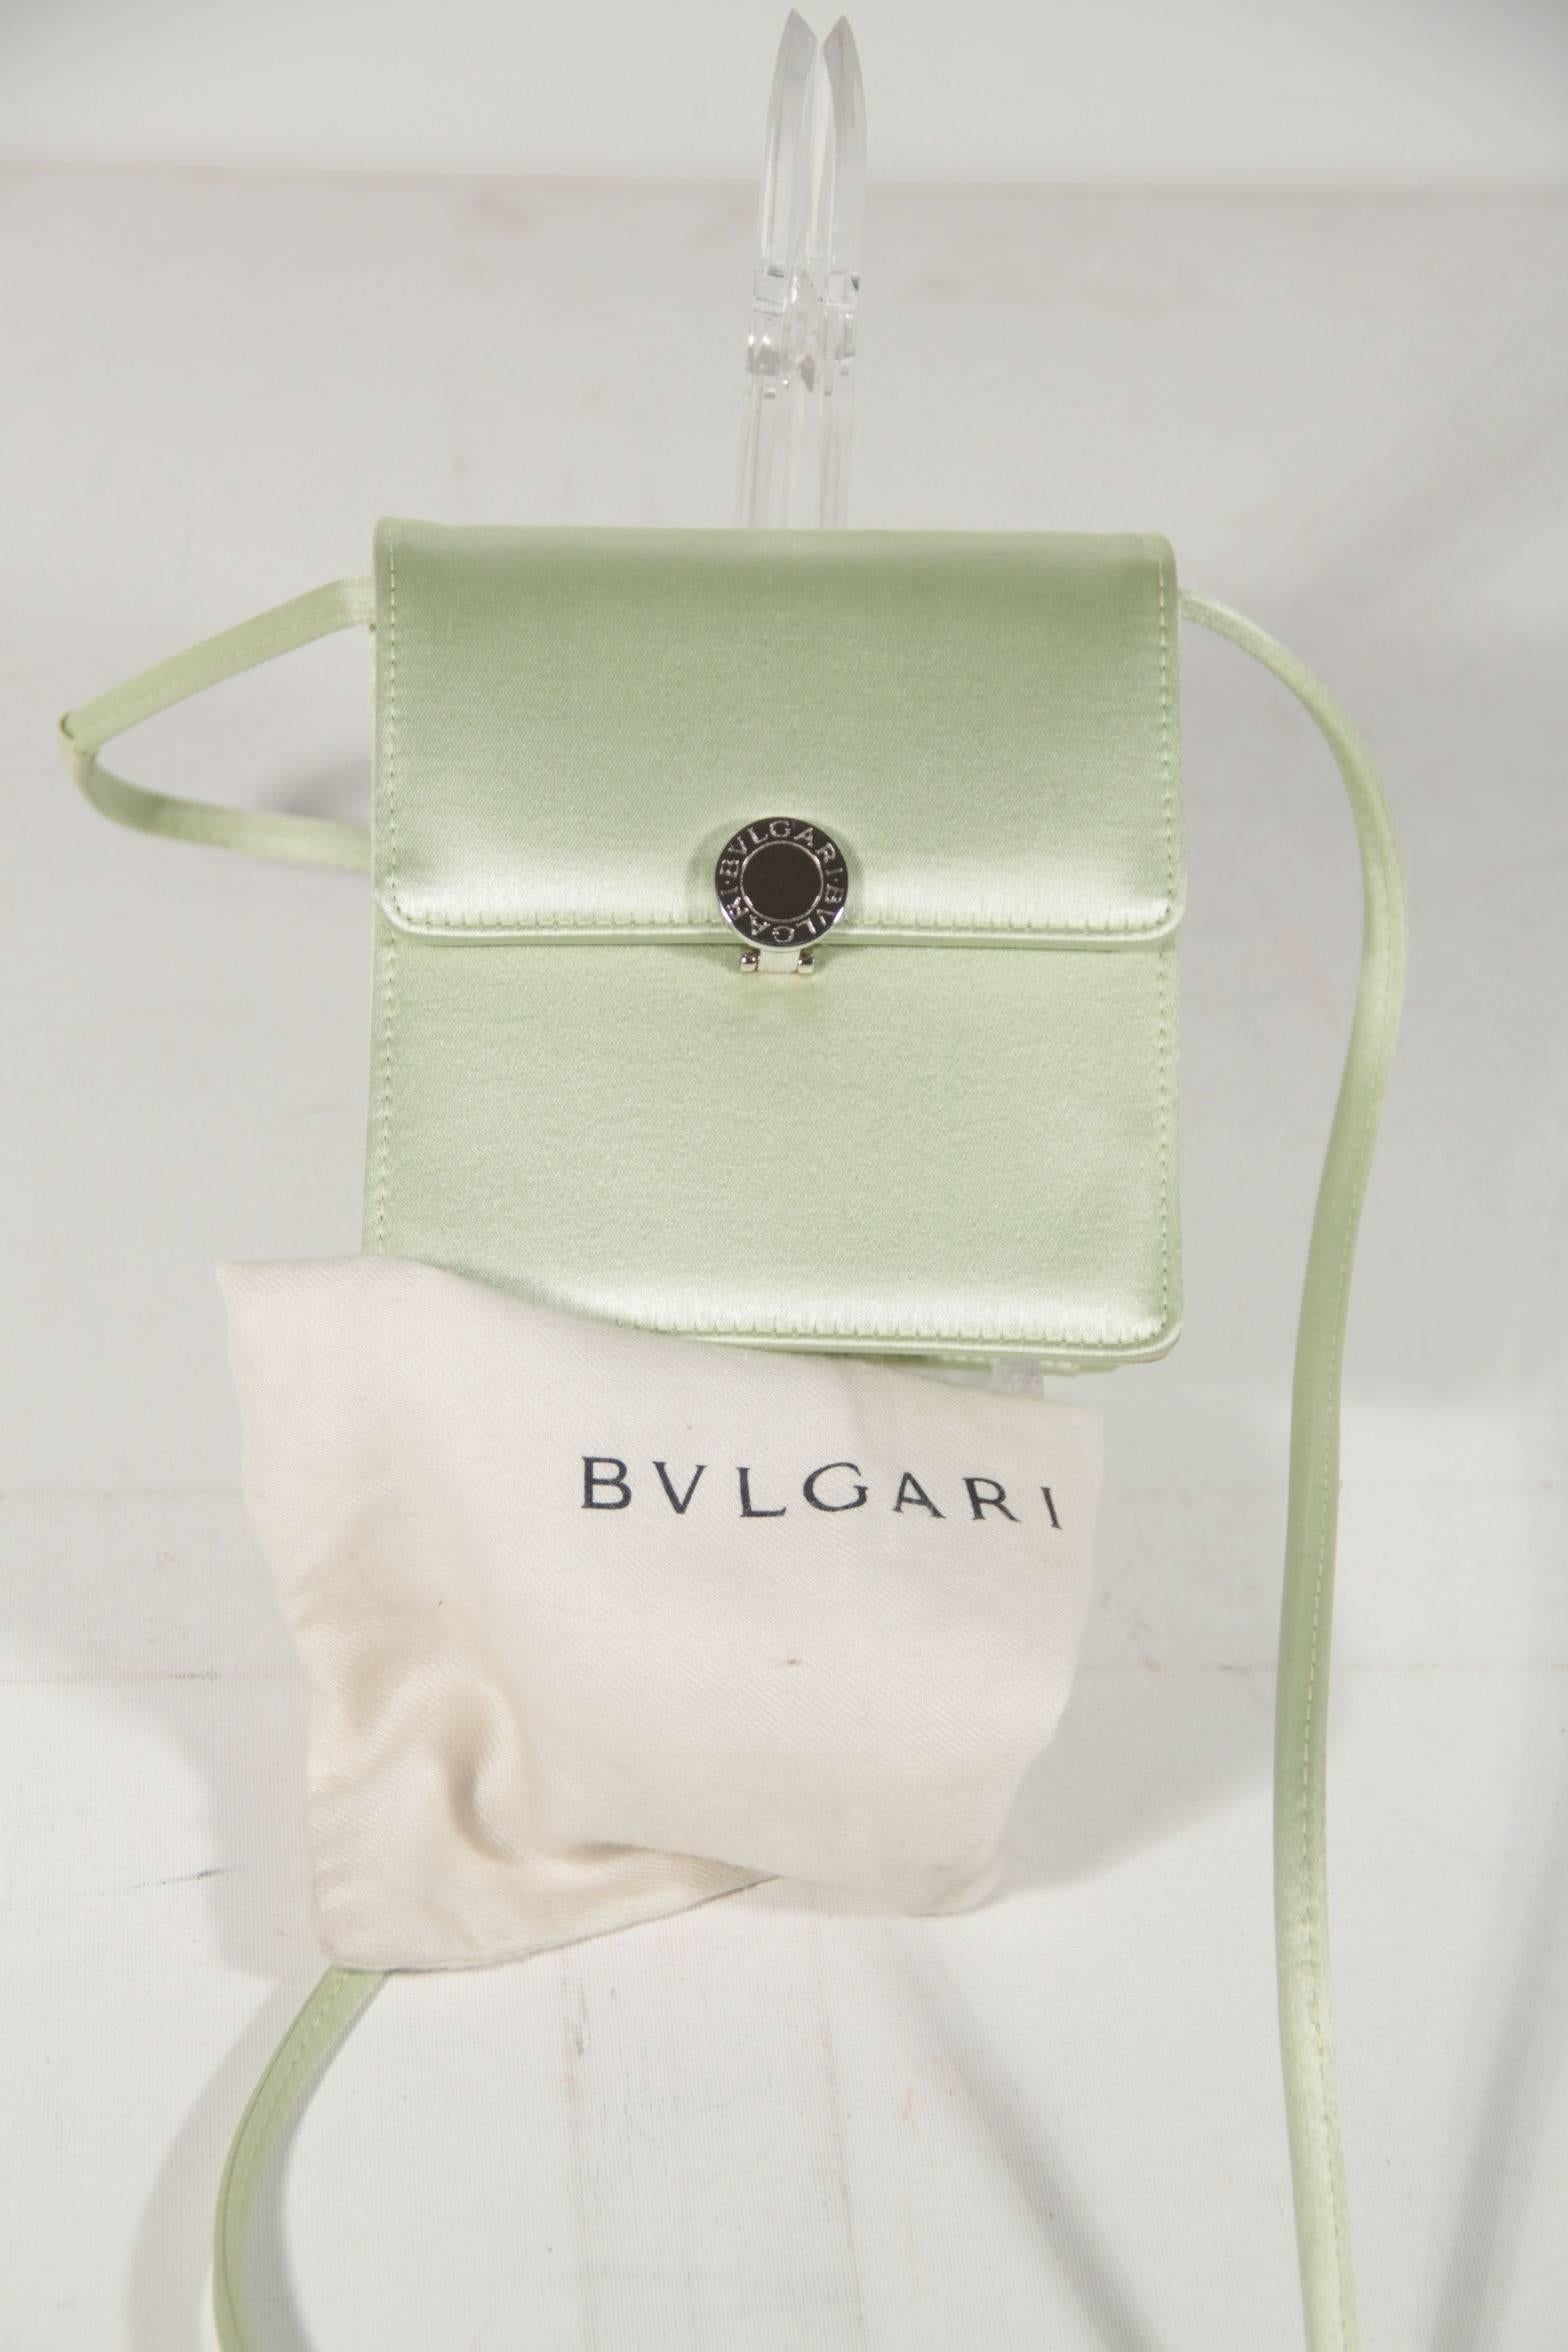 Brand: BULGARI - Made in Italy

Logos / Tags: BVLGARI tag inside (with 'Made in Italy' and serial code engraved on its reverse), signed hardware, BVLGARI signature on the main closure

Condition (please read our condition chart below):

MINT: